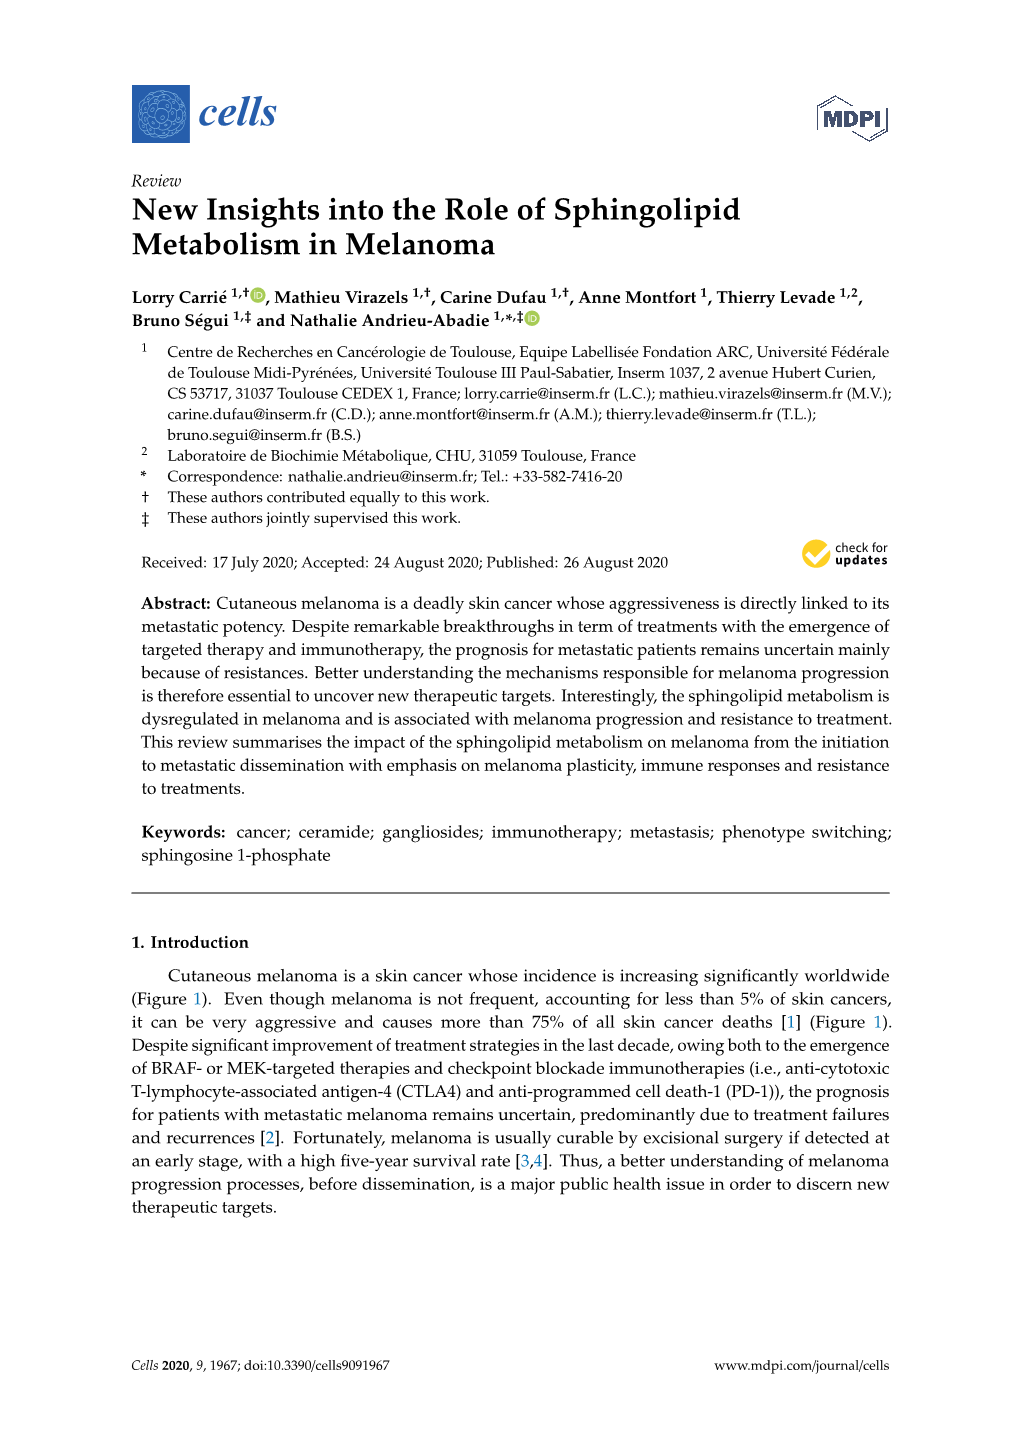 New Insights Into the Role of Sphingolipid Metabolism in Melanoma